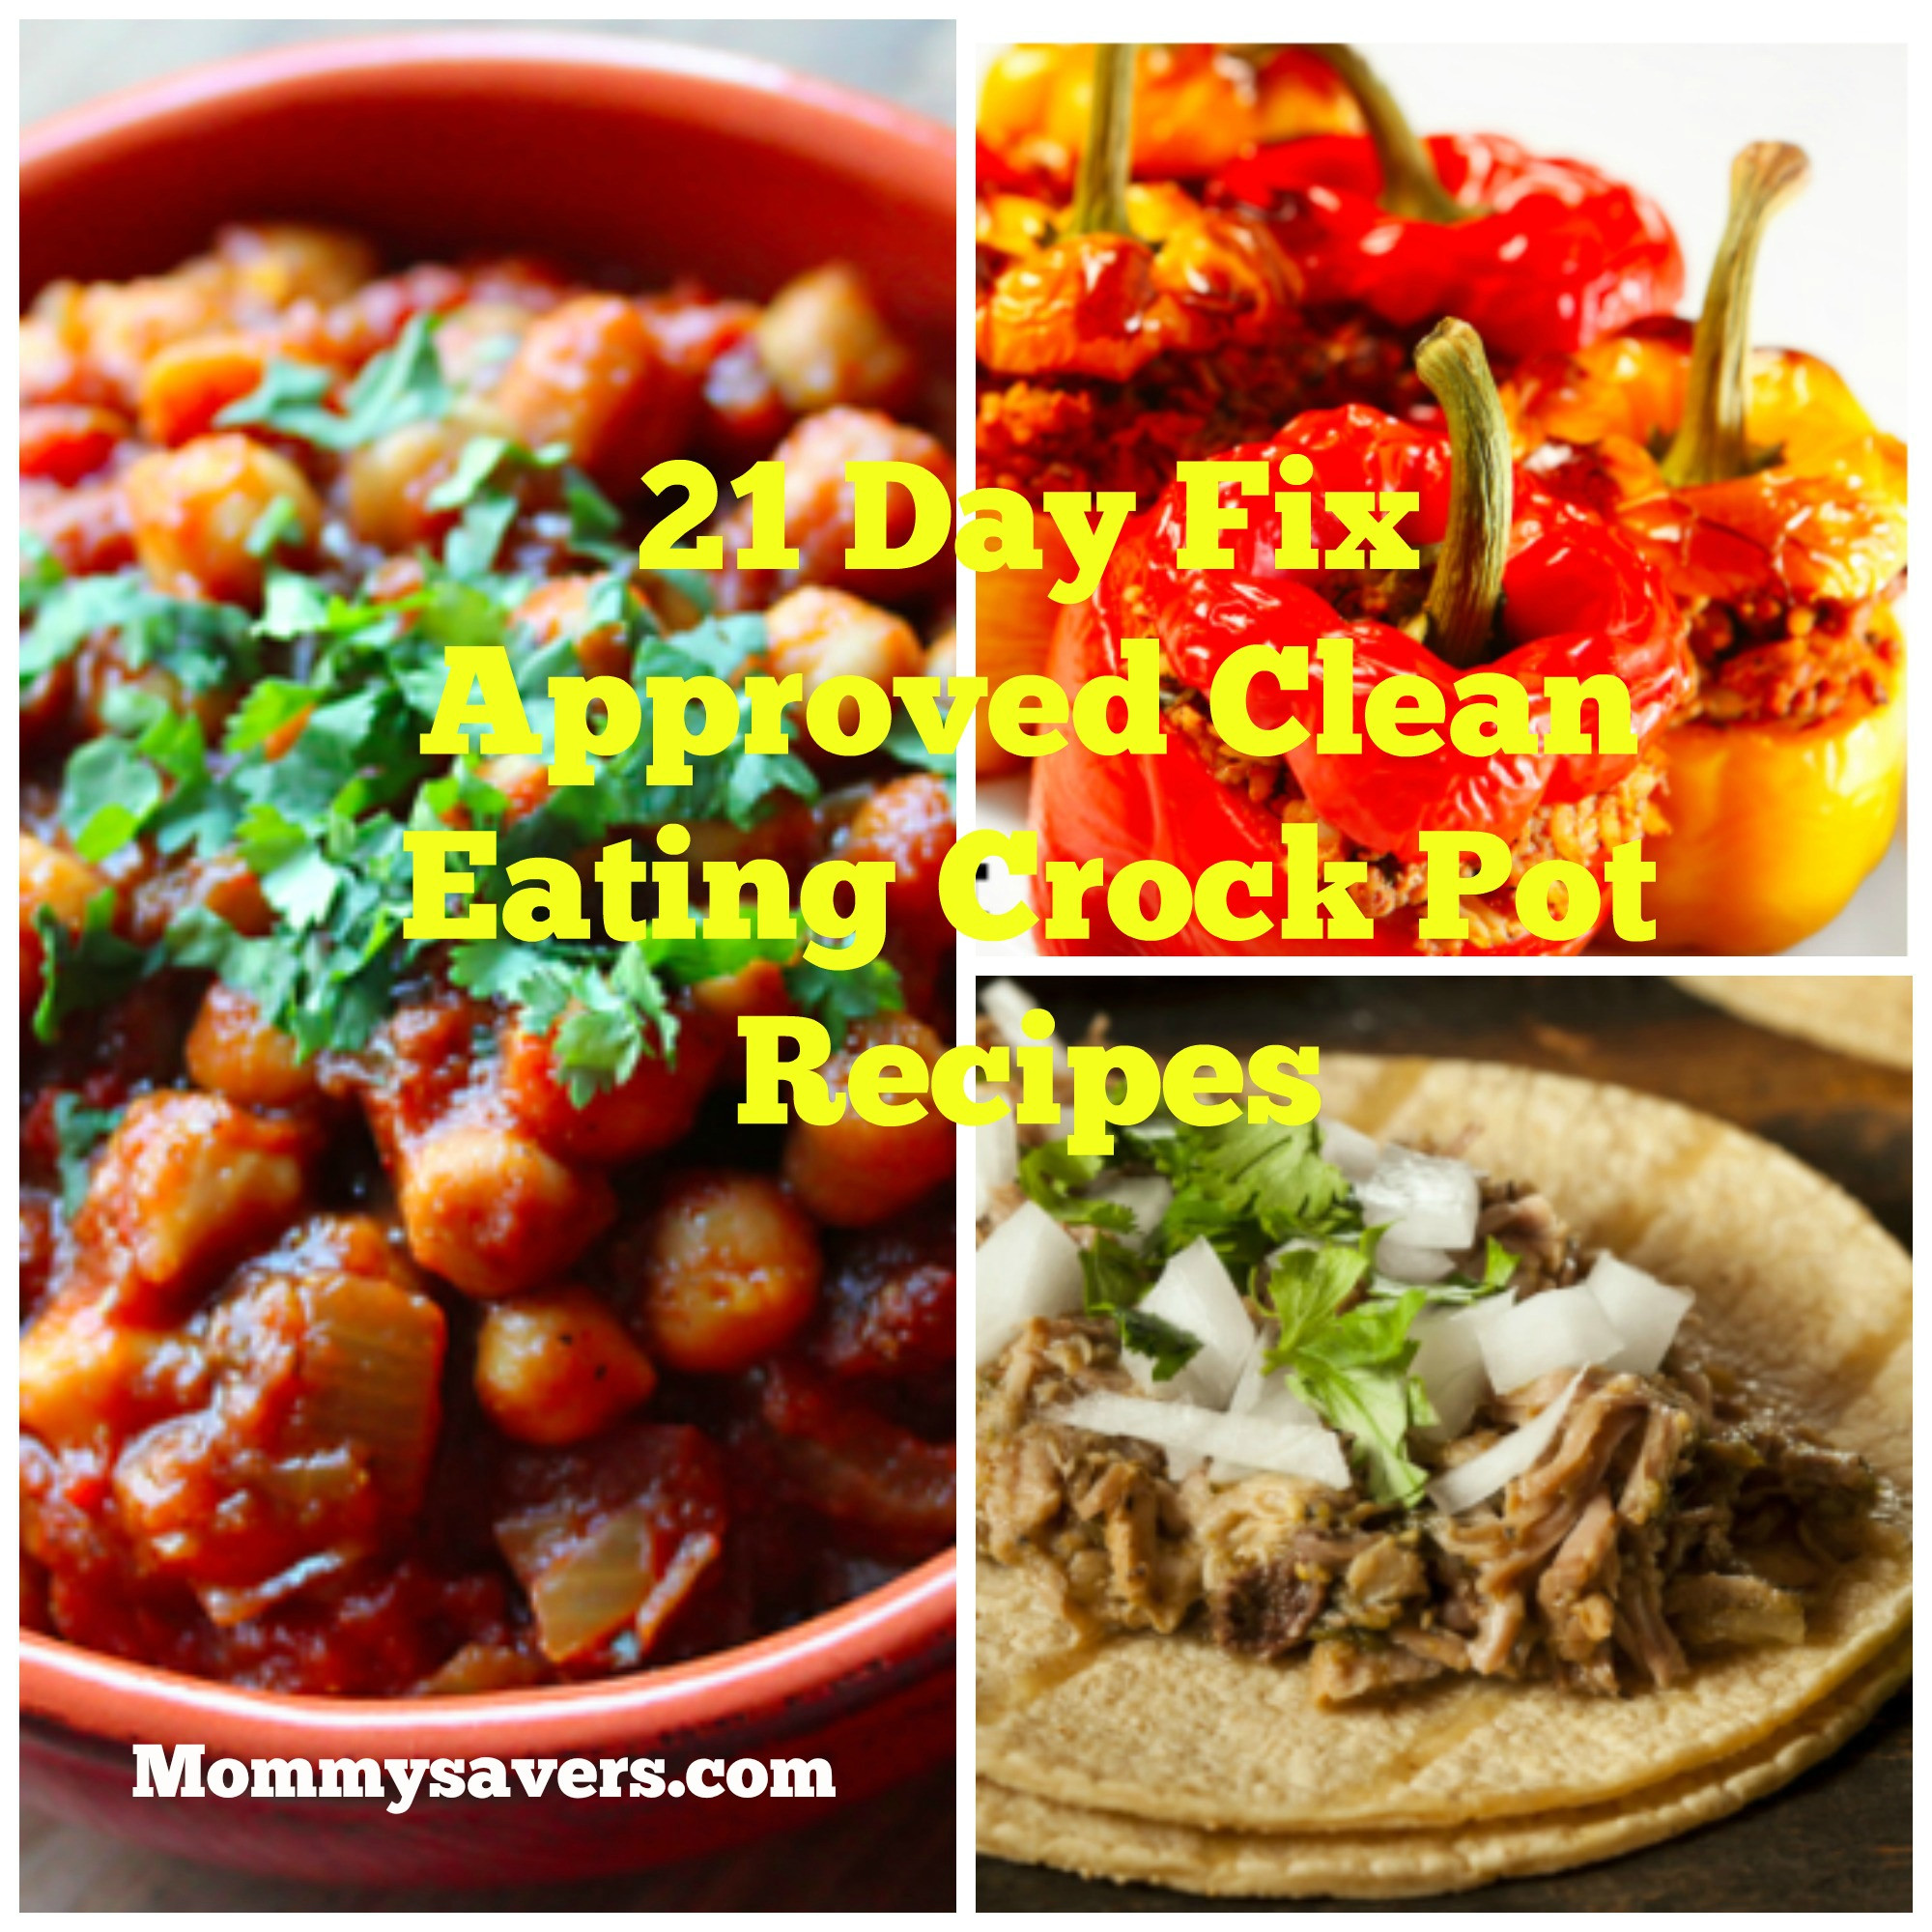 Clean Eating Crock Pot Meals
 21 Day Fix Approved Clean Eating Crock Pot Recipes